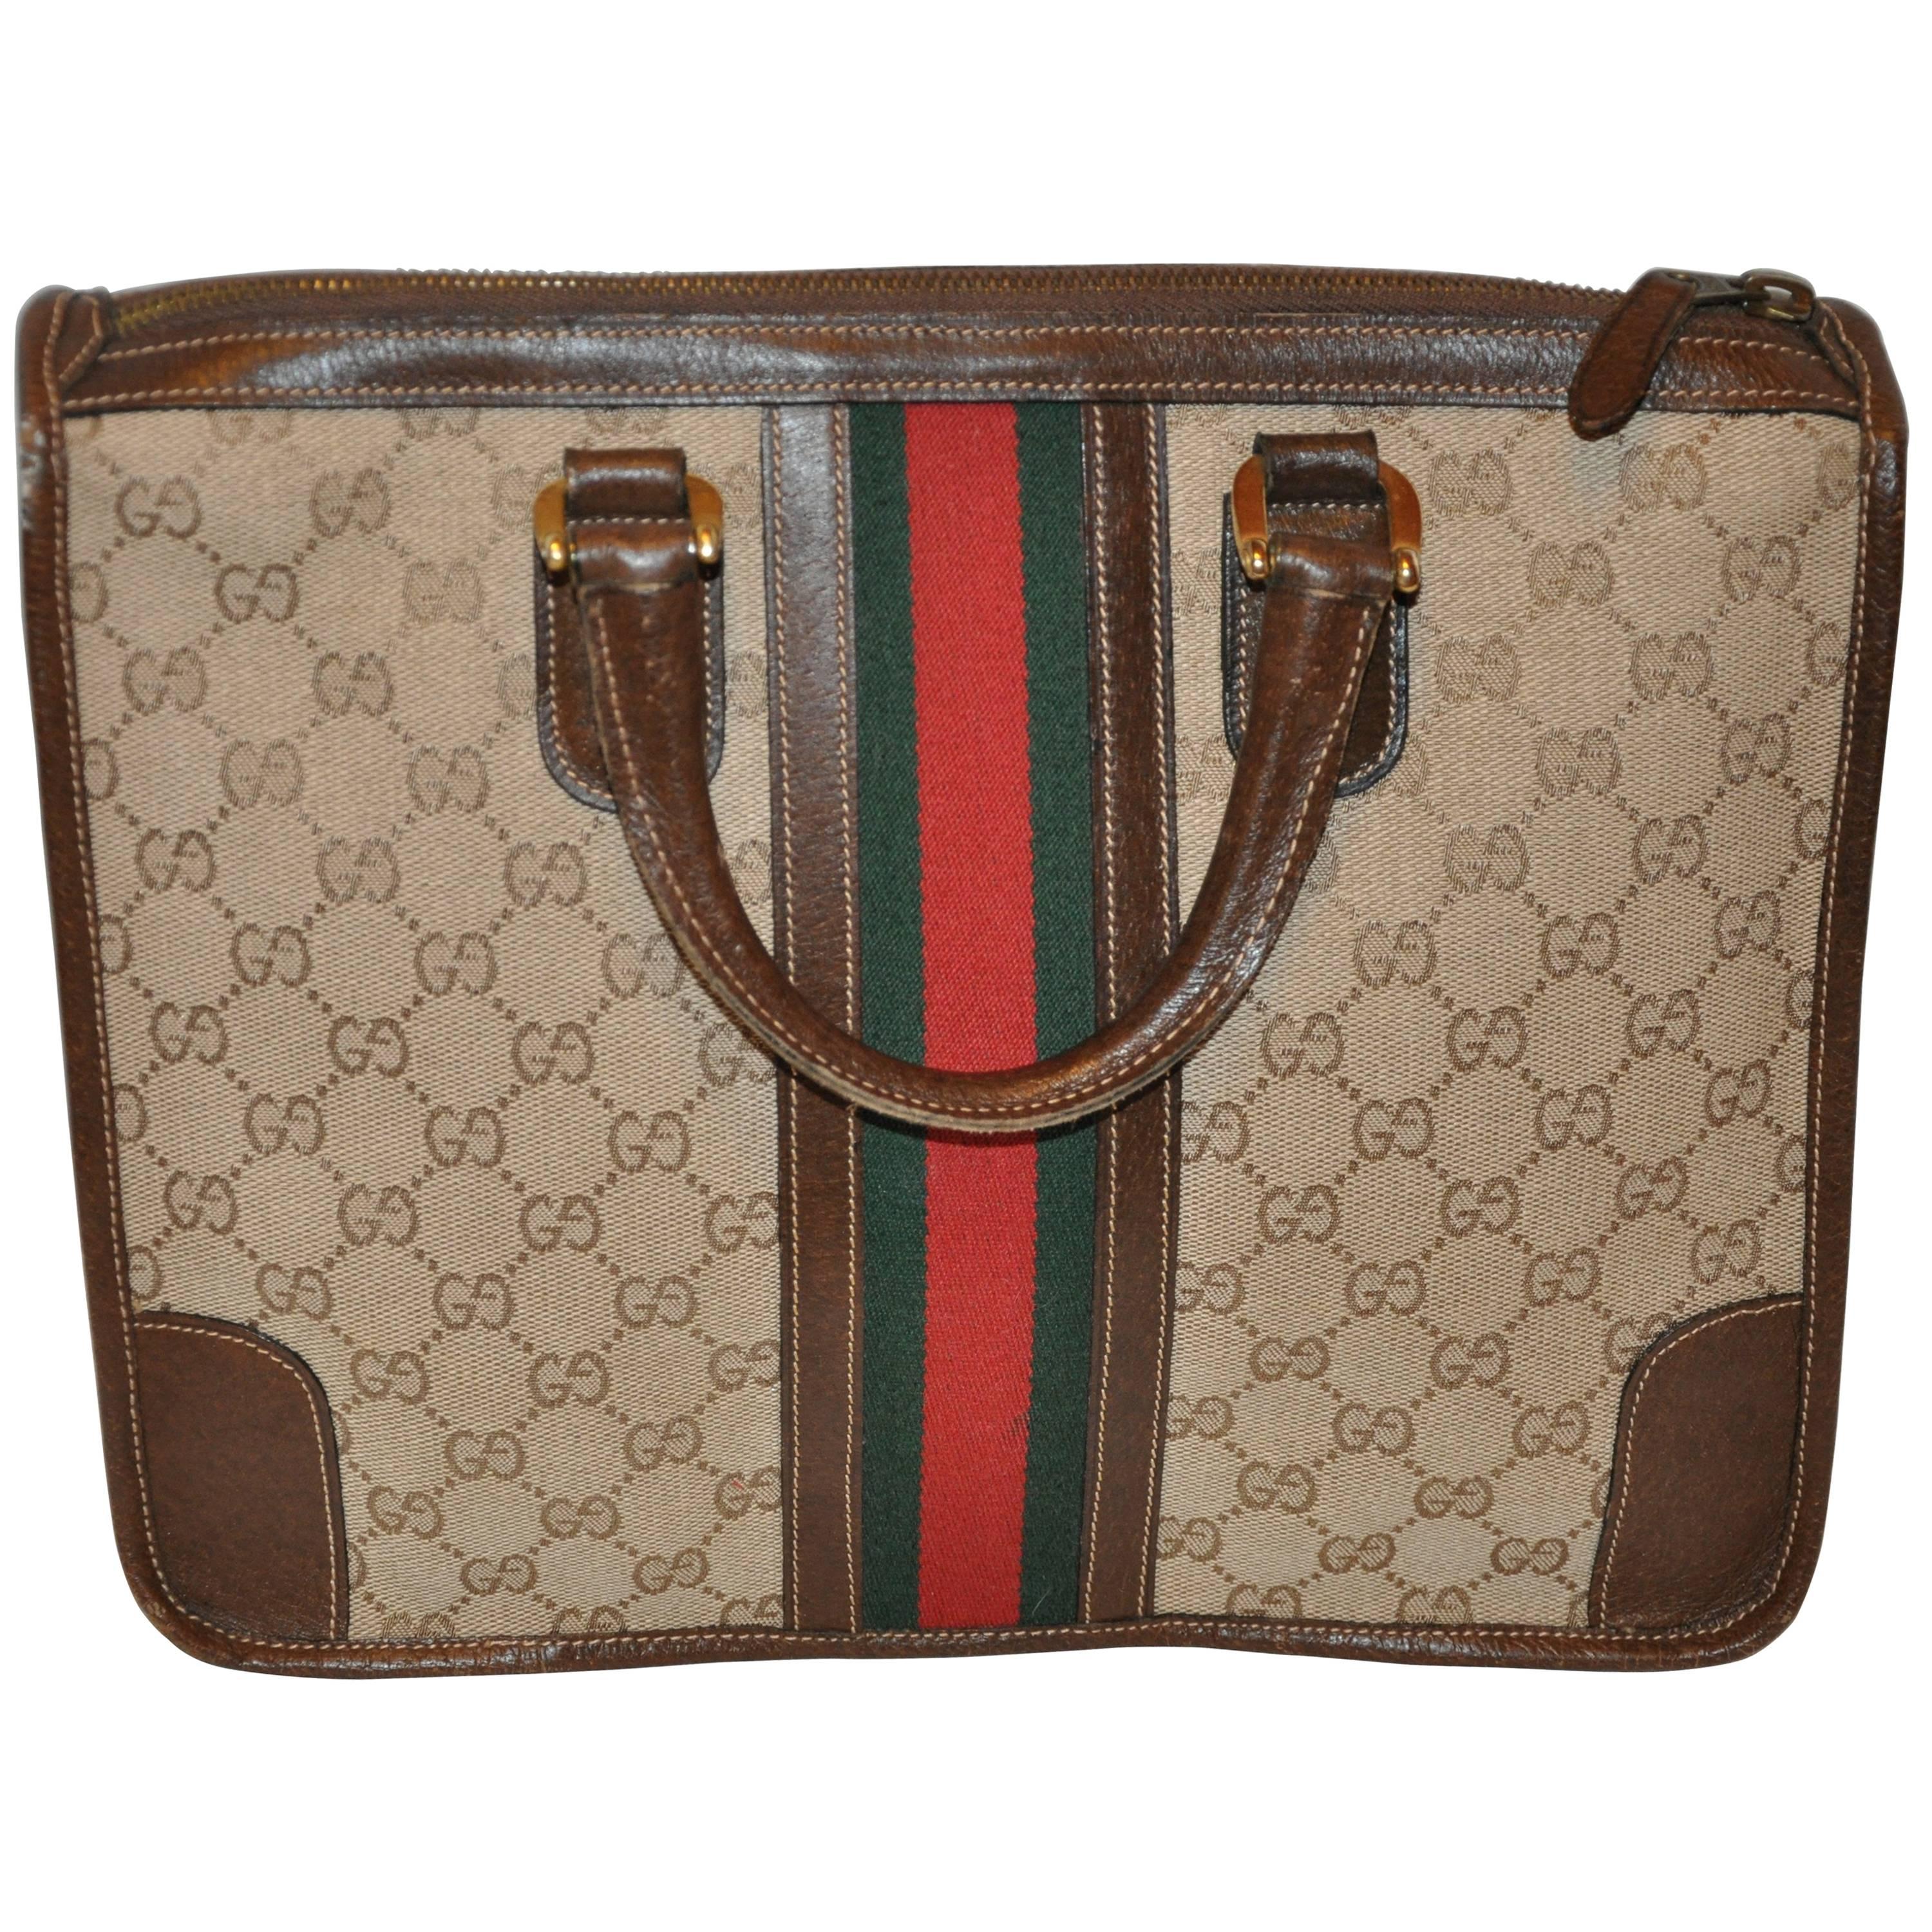 Gucci "GG" Canvas with Signature Stripe Zippered Top Tote 